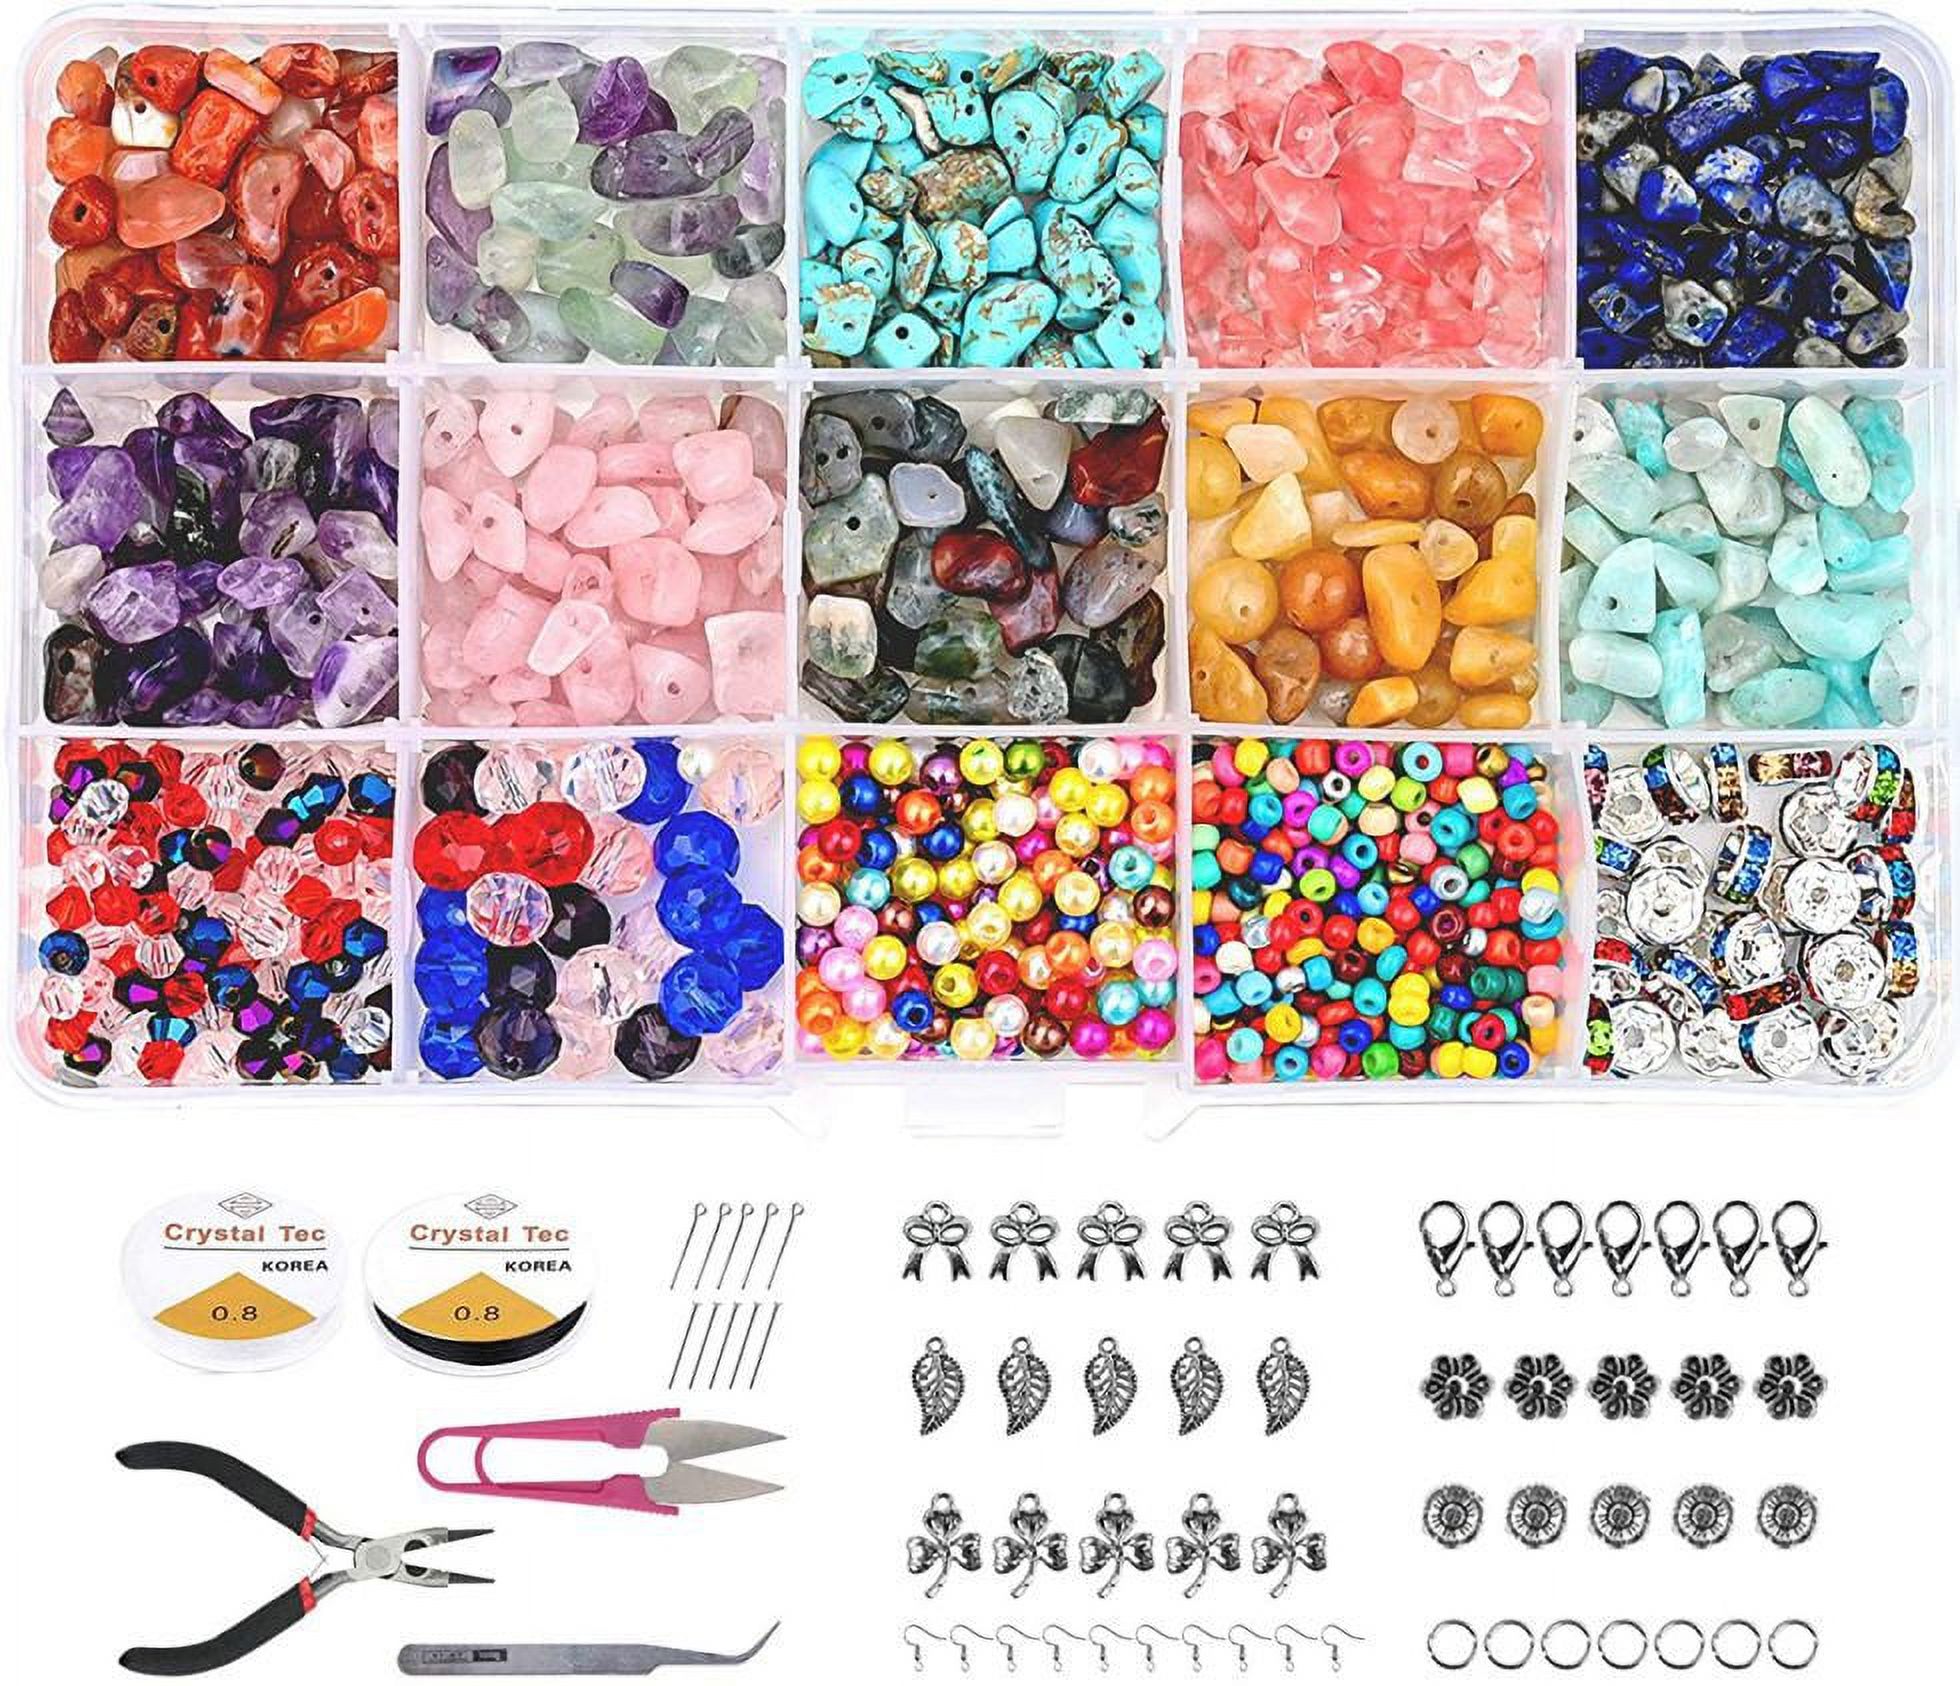 JESOT Gemstones for Jewelry Making, 1126PCS Rock Beads with Pendants,  Earring Supplies and Making Tools Kit for DIY Bracelet Necklace and Earrings